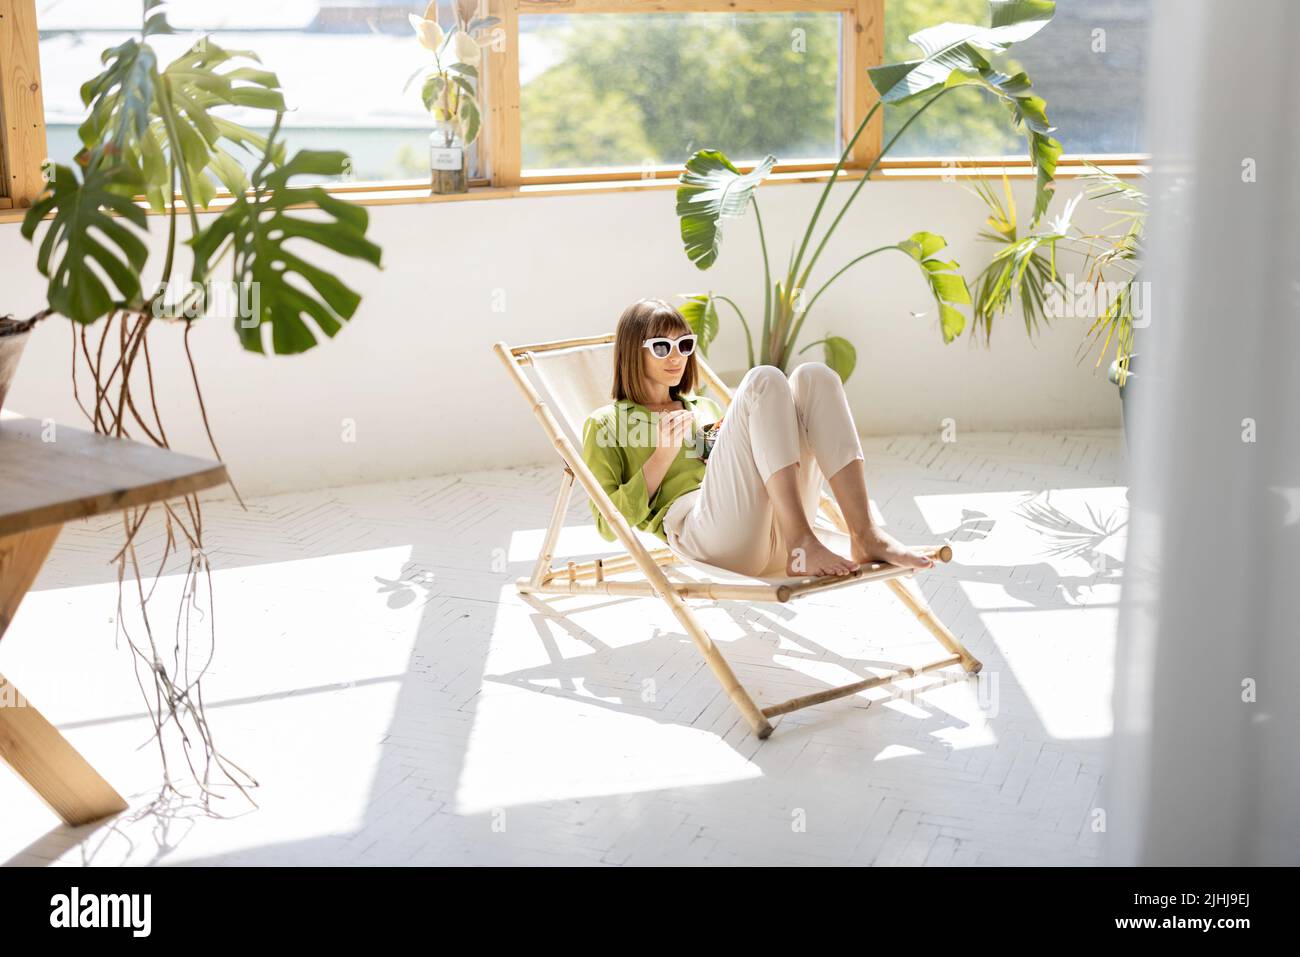 Woman sits relaxed with a drink in room with plants Stock Photo